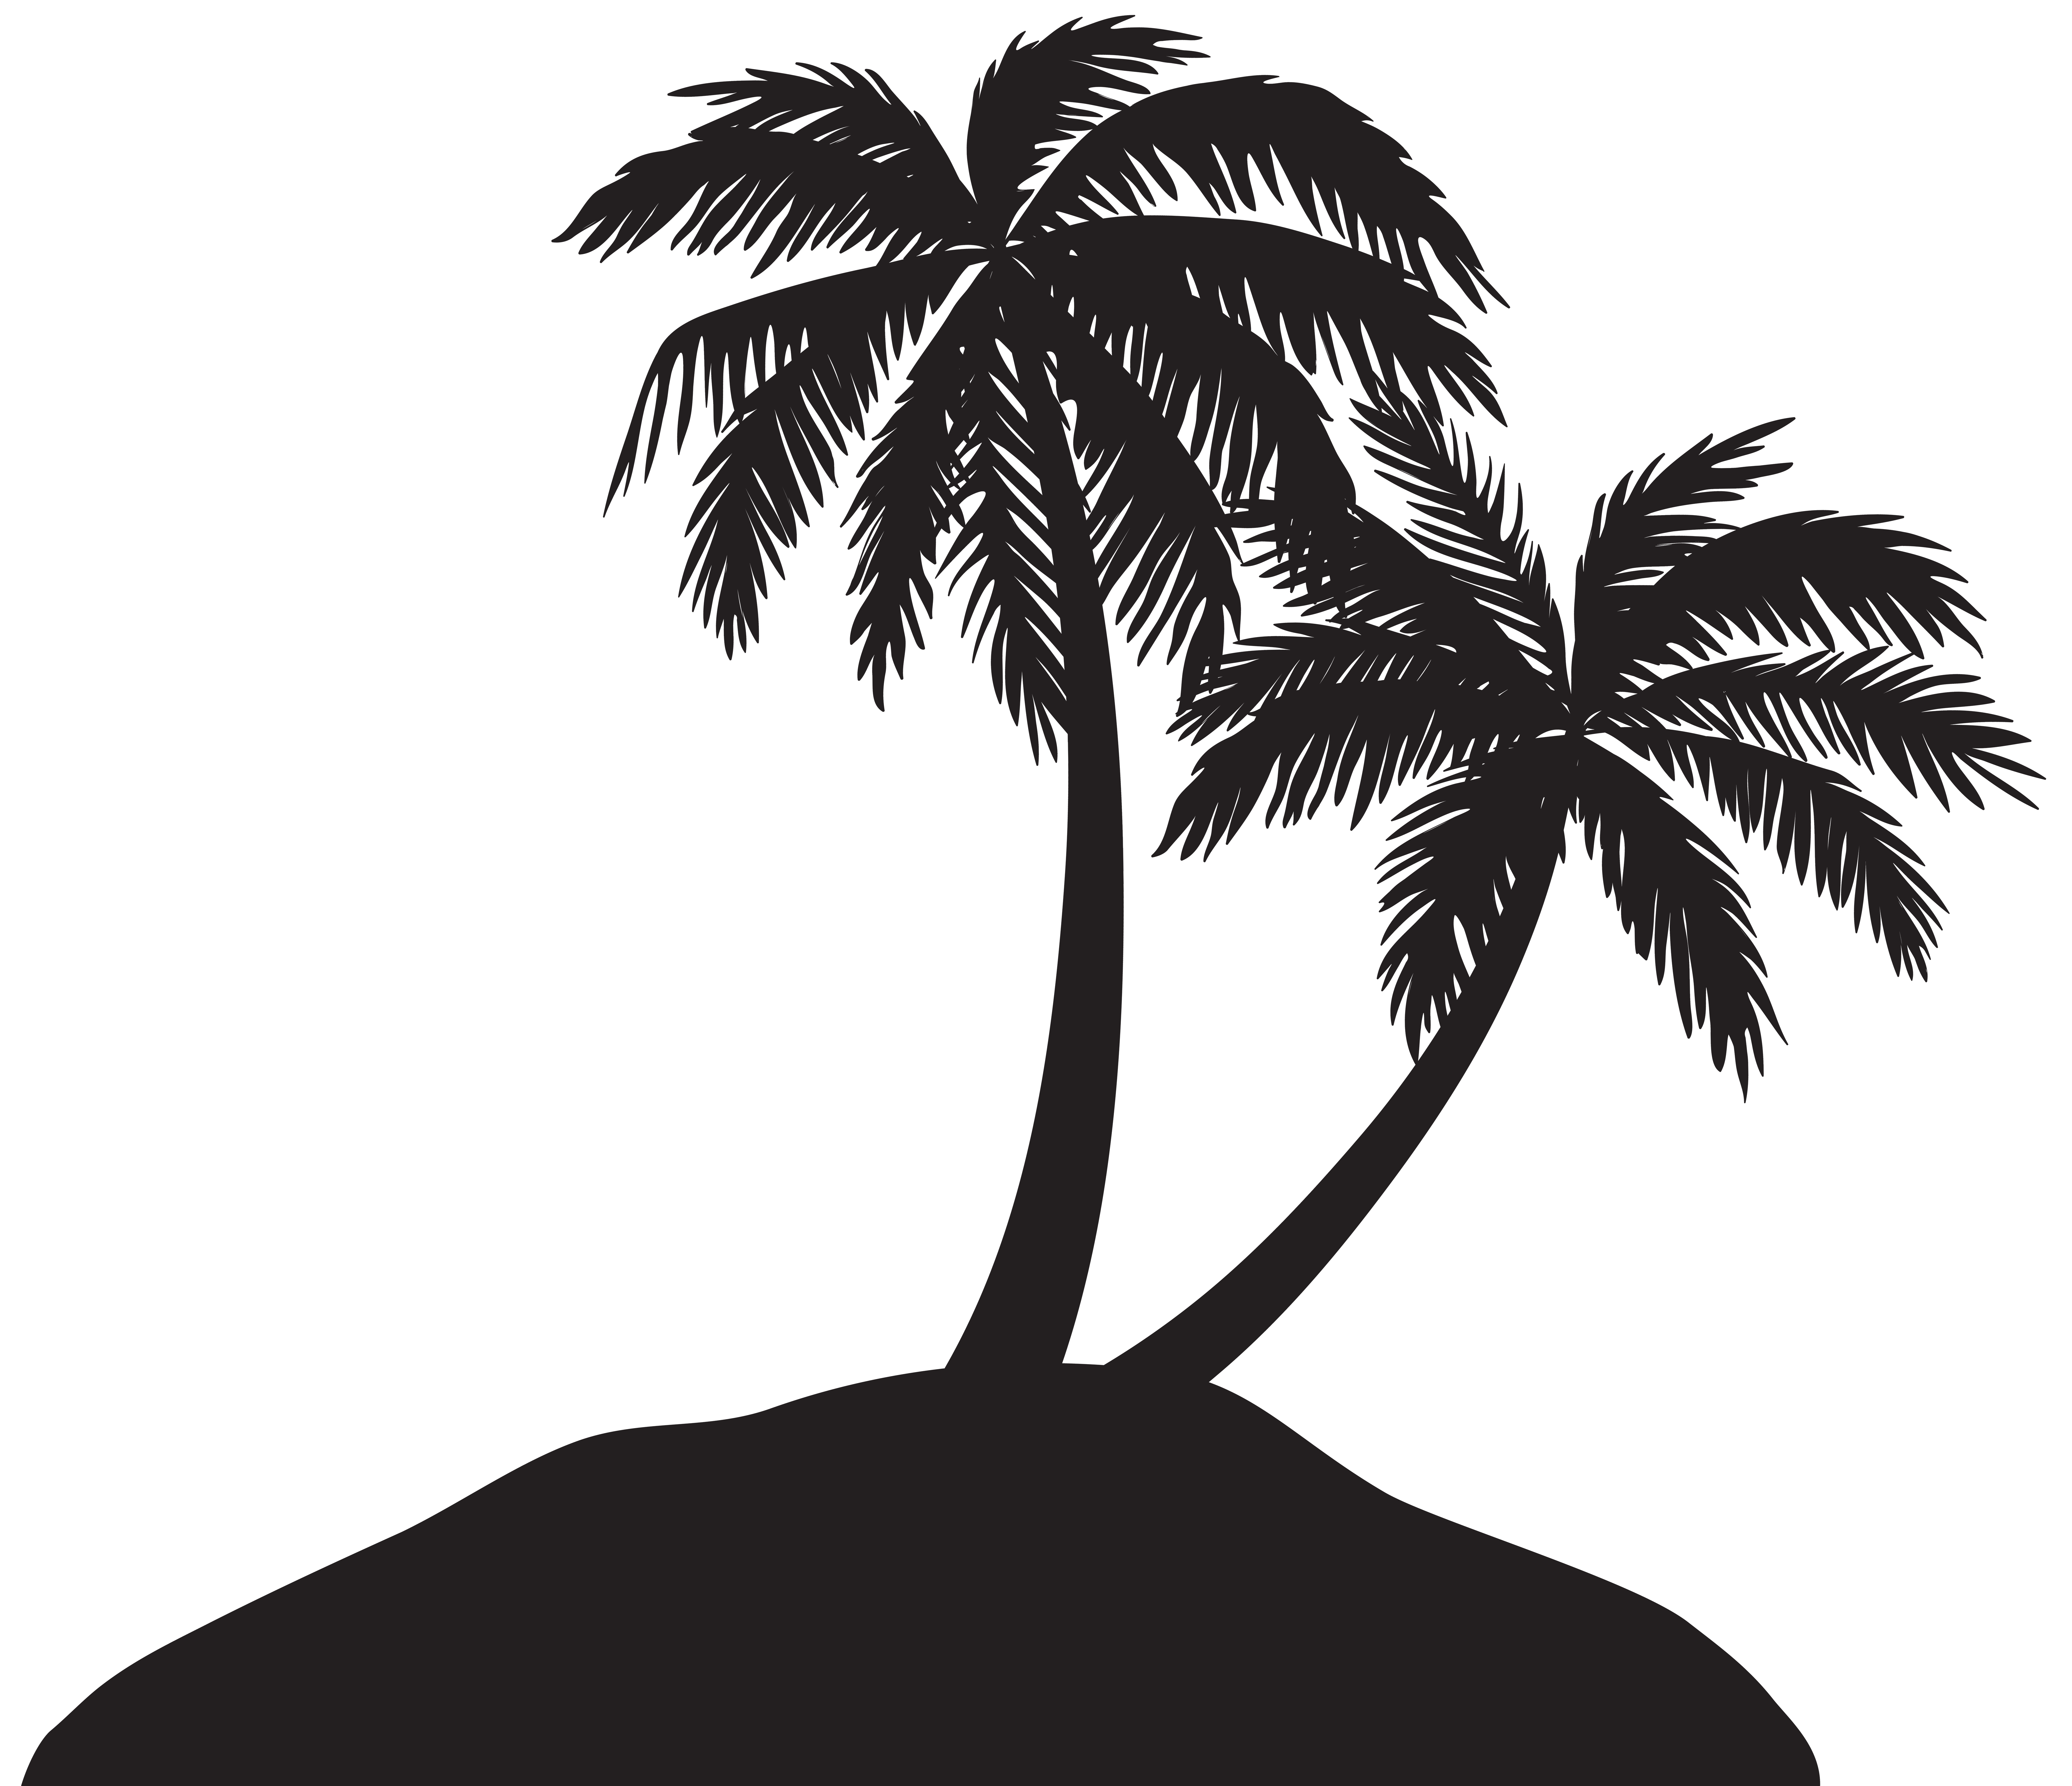 Island with trees silhouette. Parrot clipart palm tree